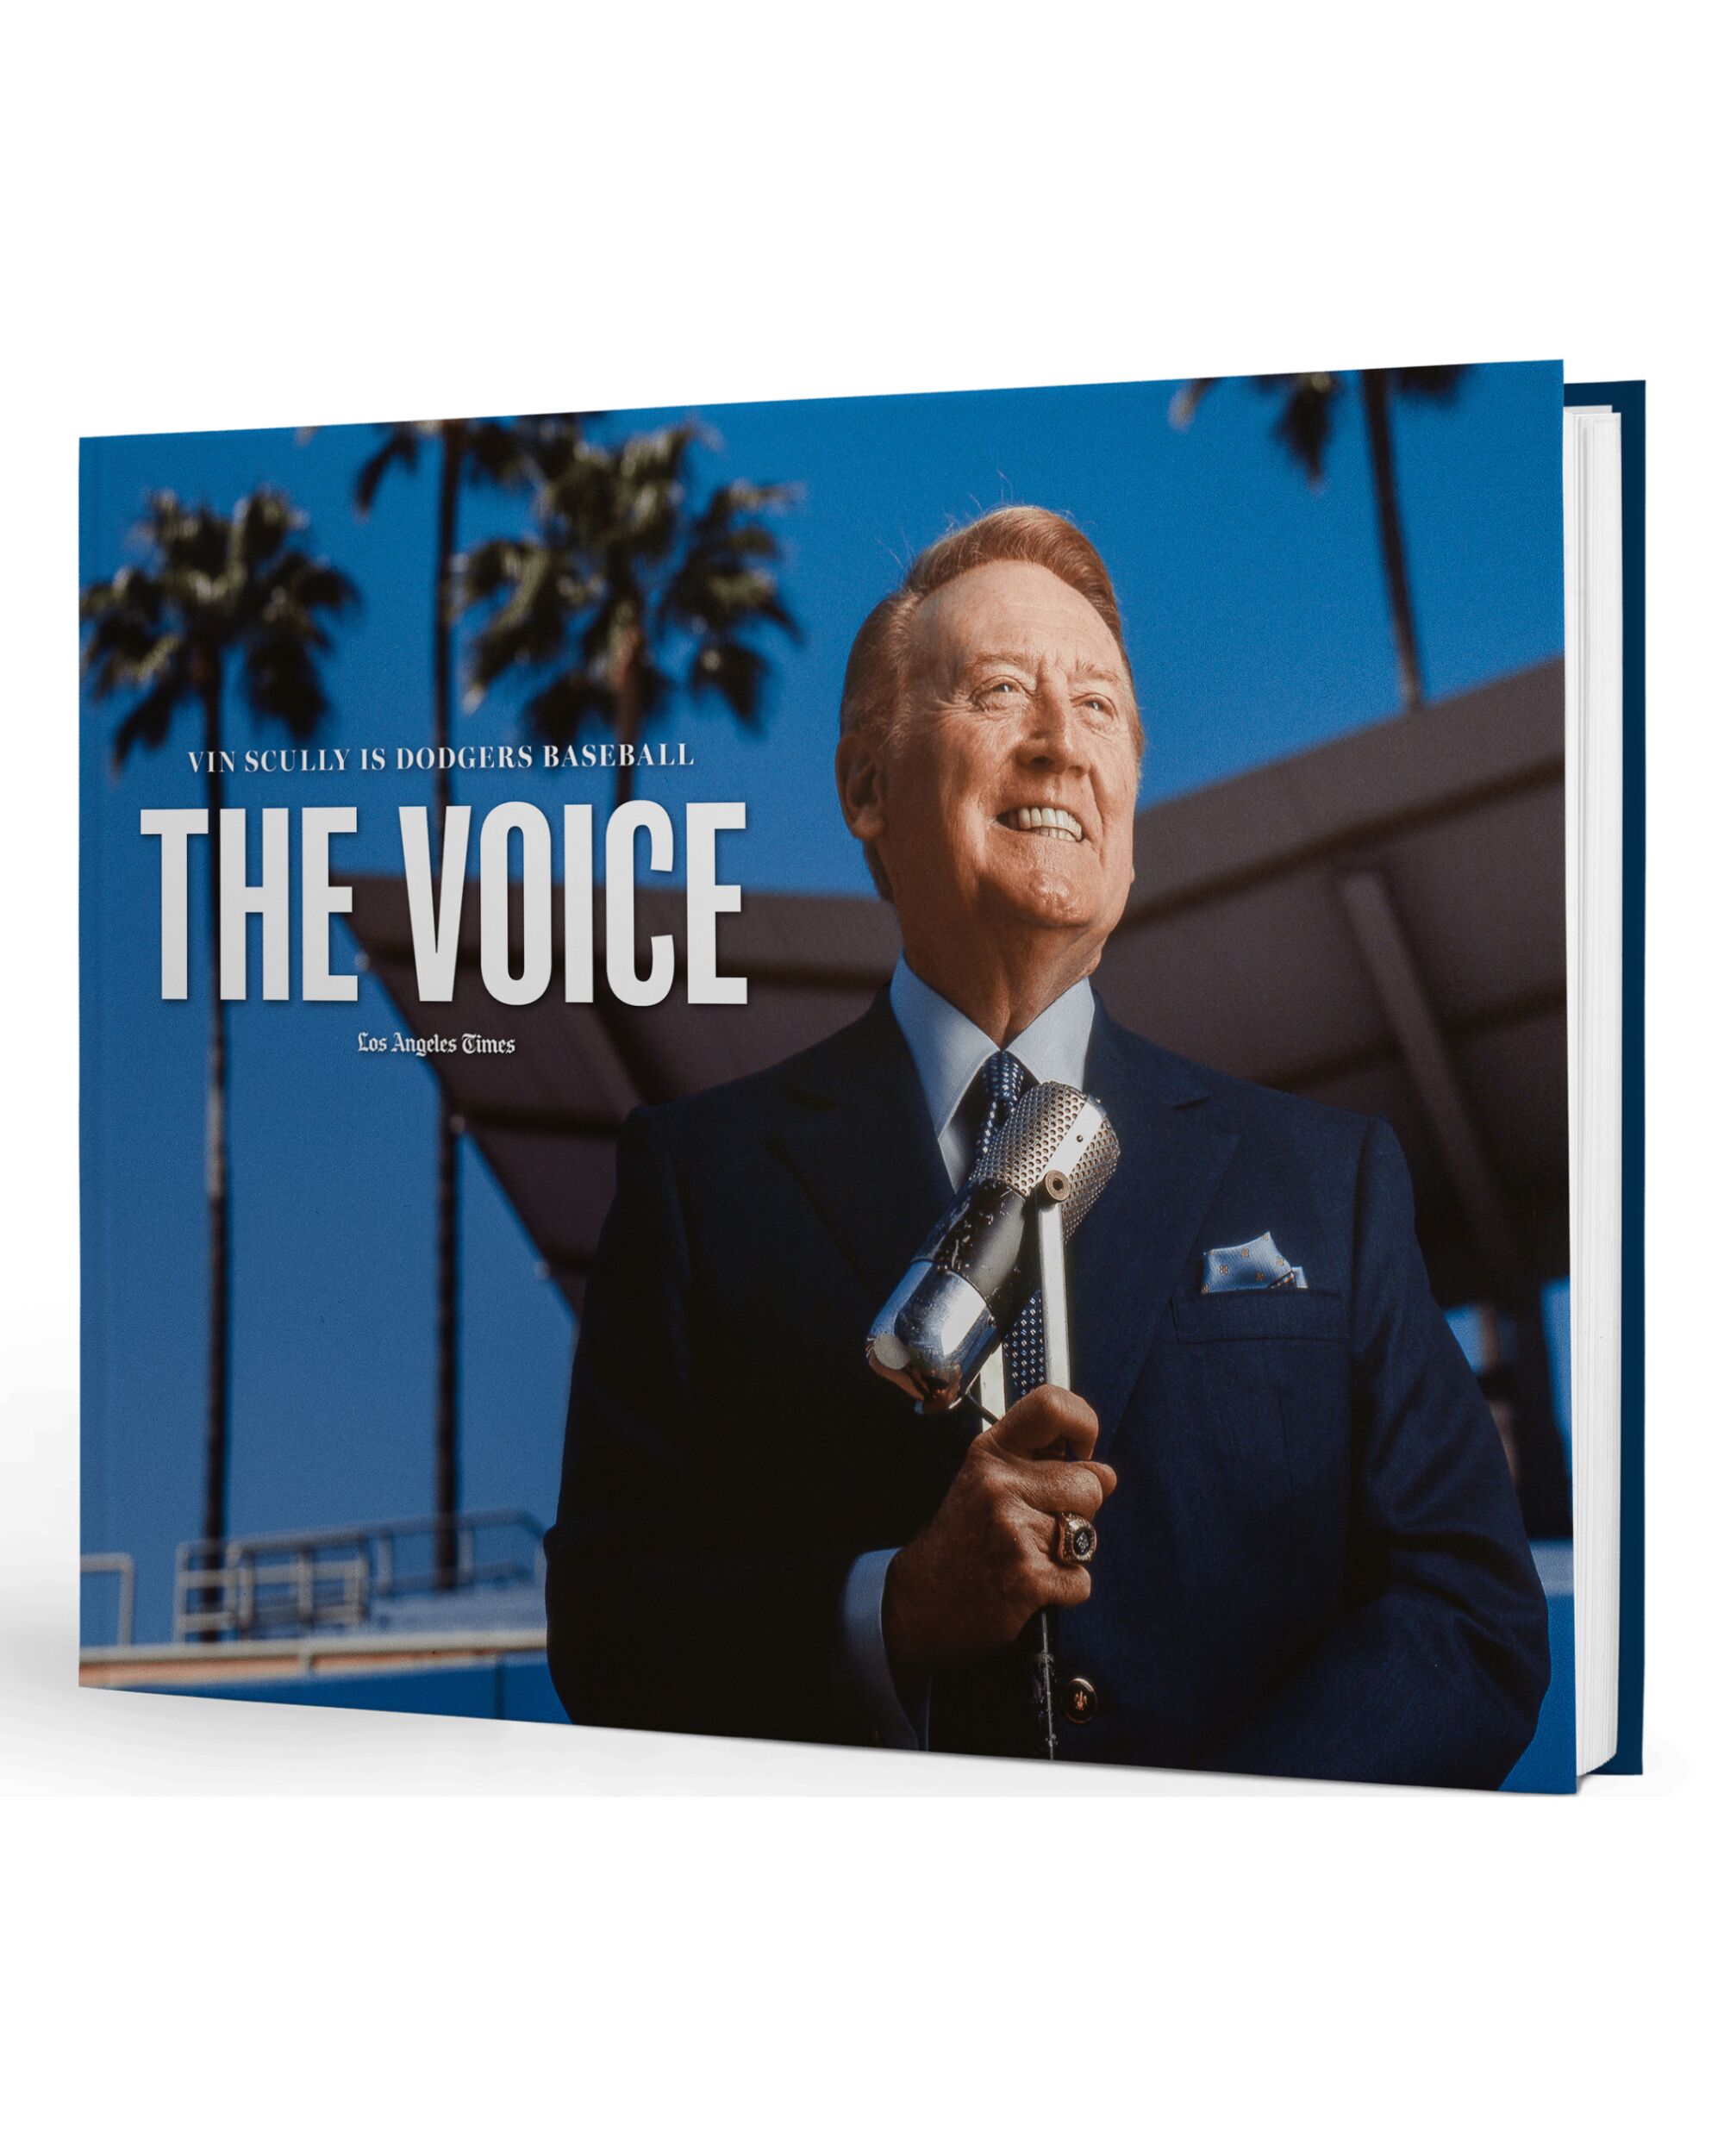 "The Voice: Vin Scully is Dodgers baseball" book